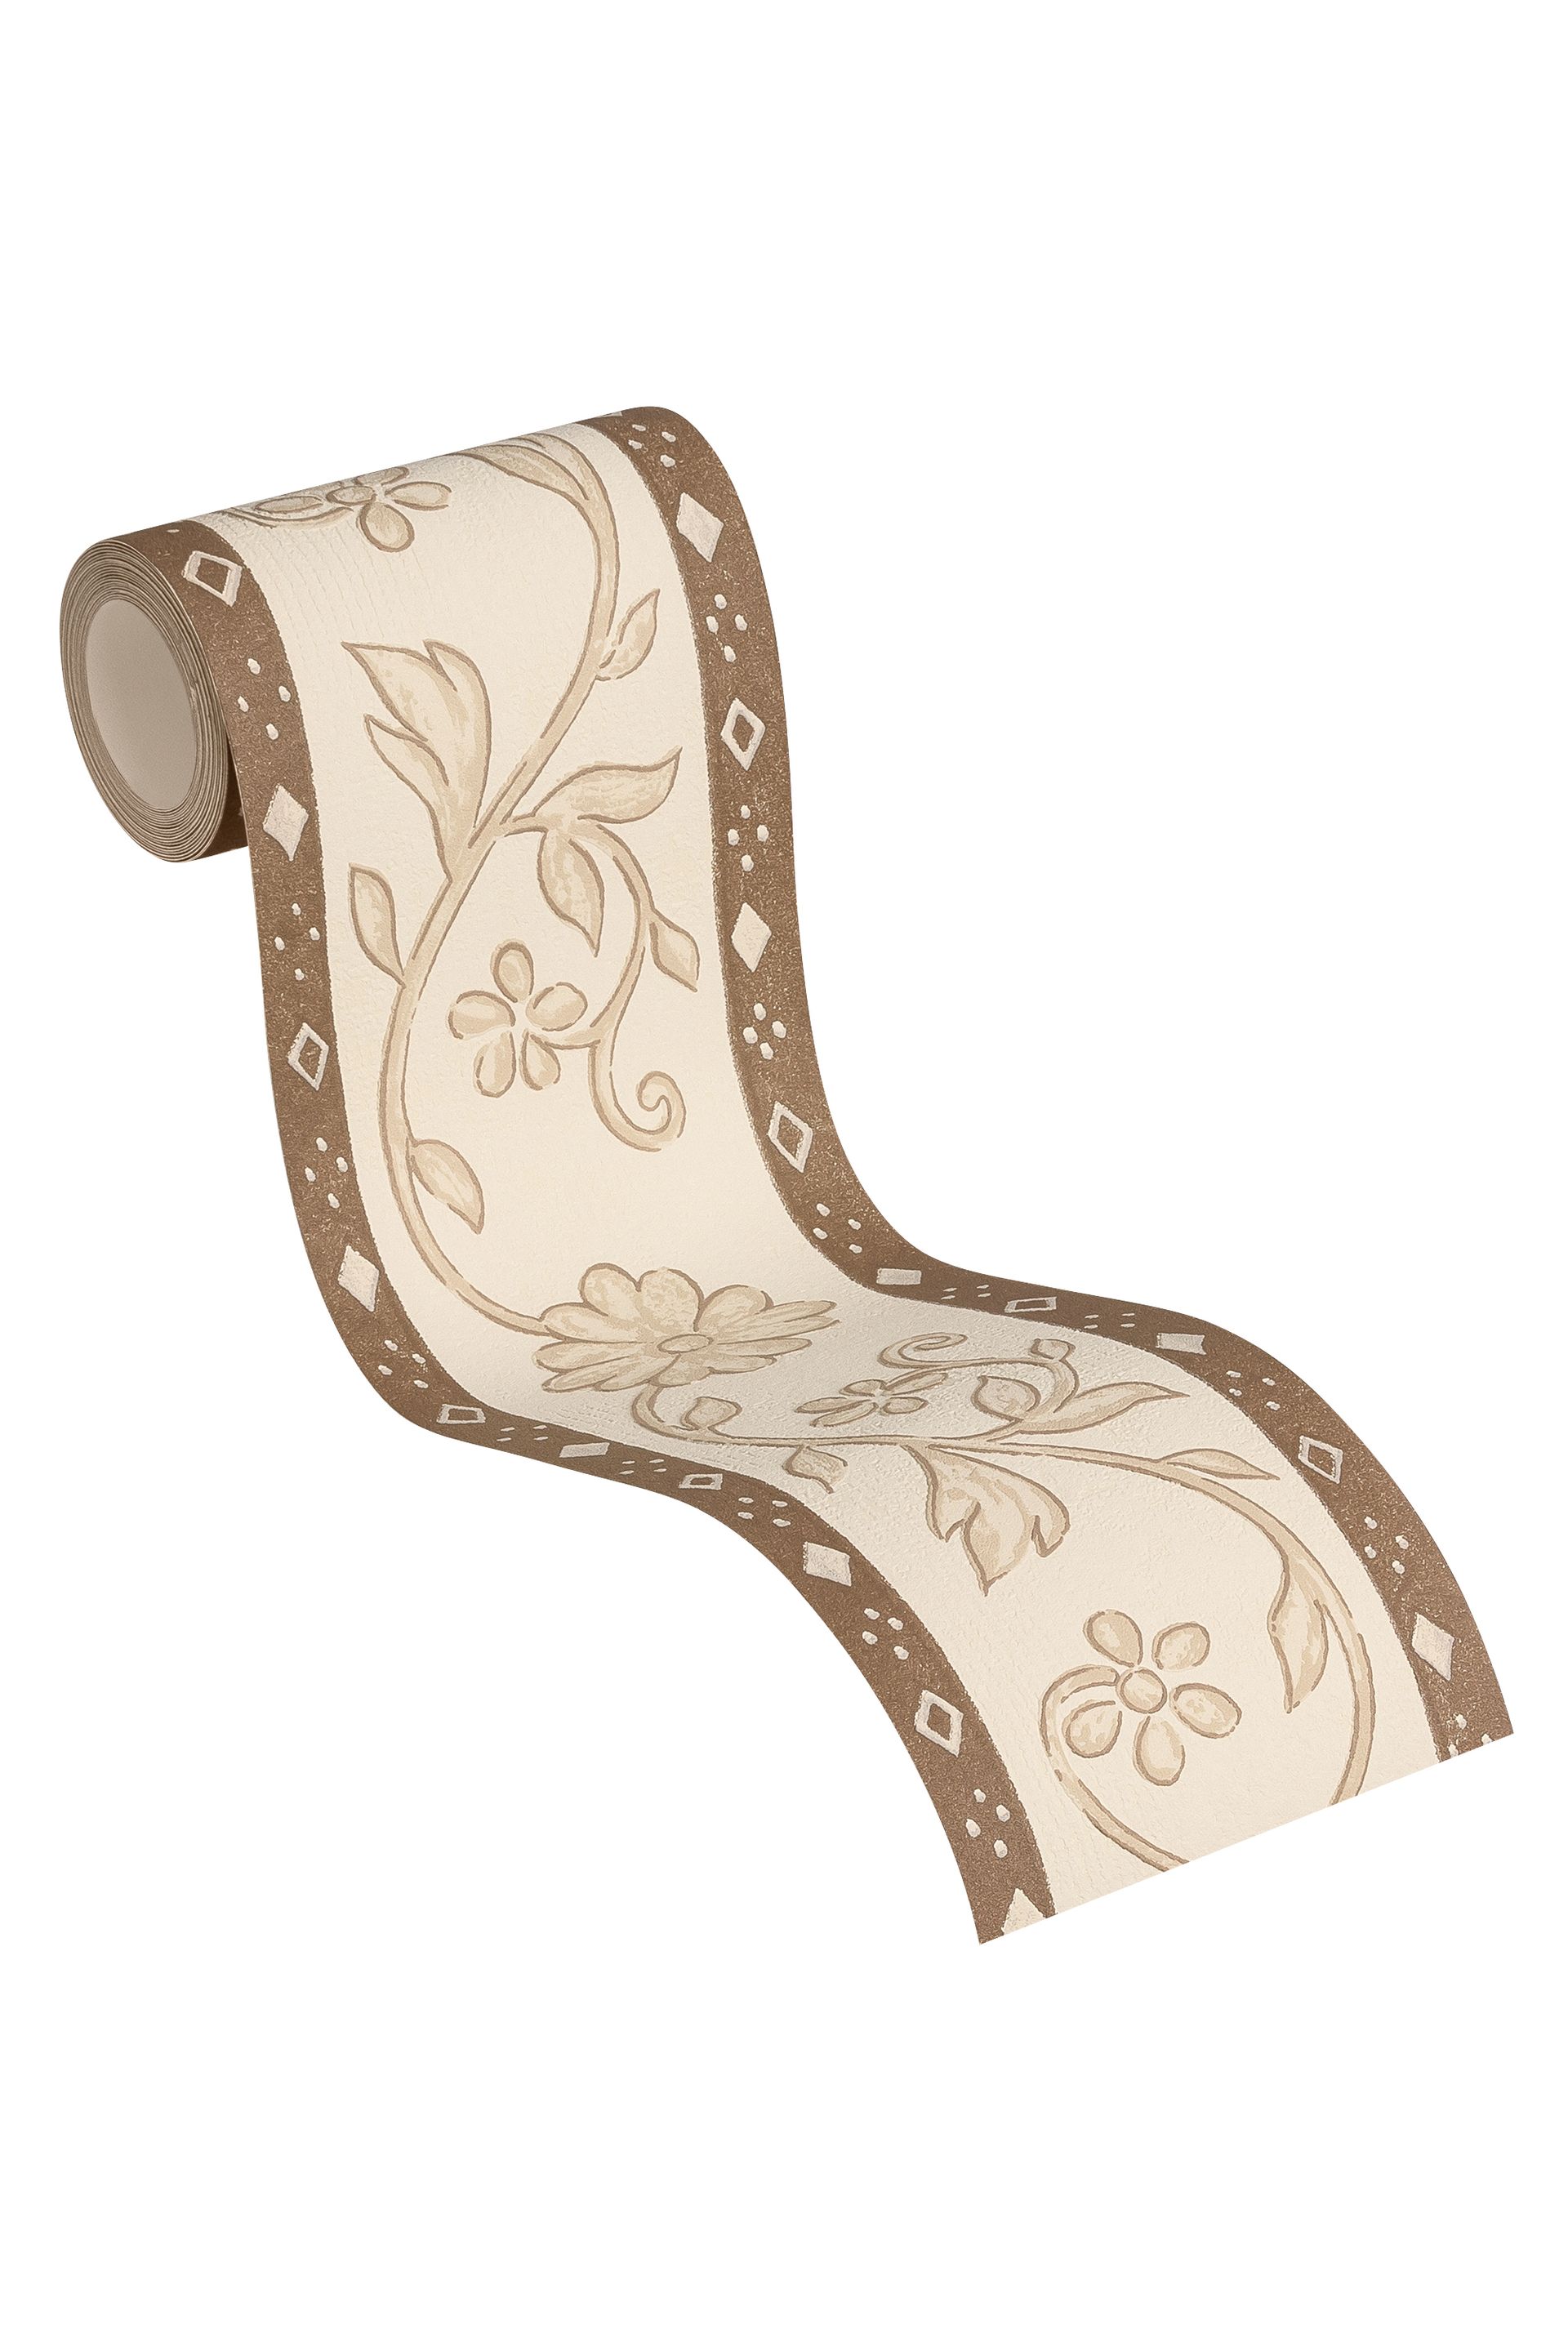 A.S. Création Only Borders 10 5241-71 Creme Floral